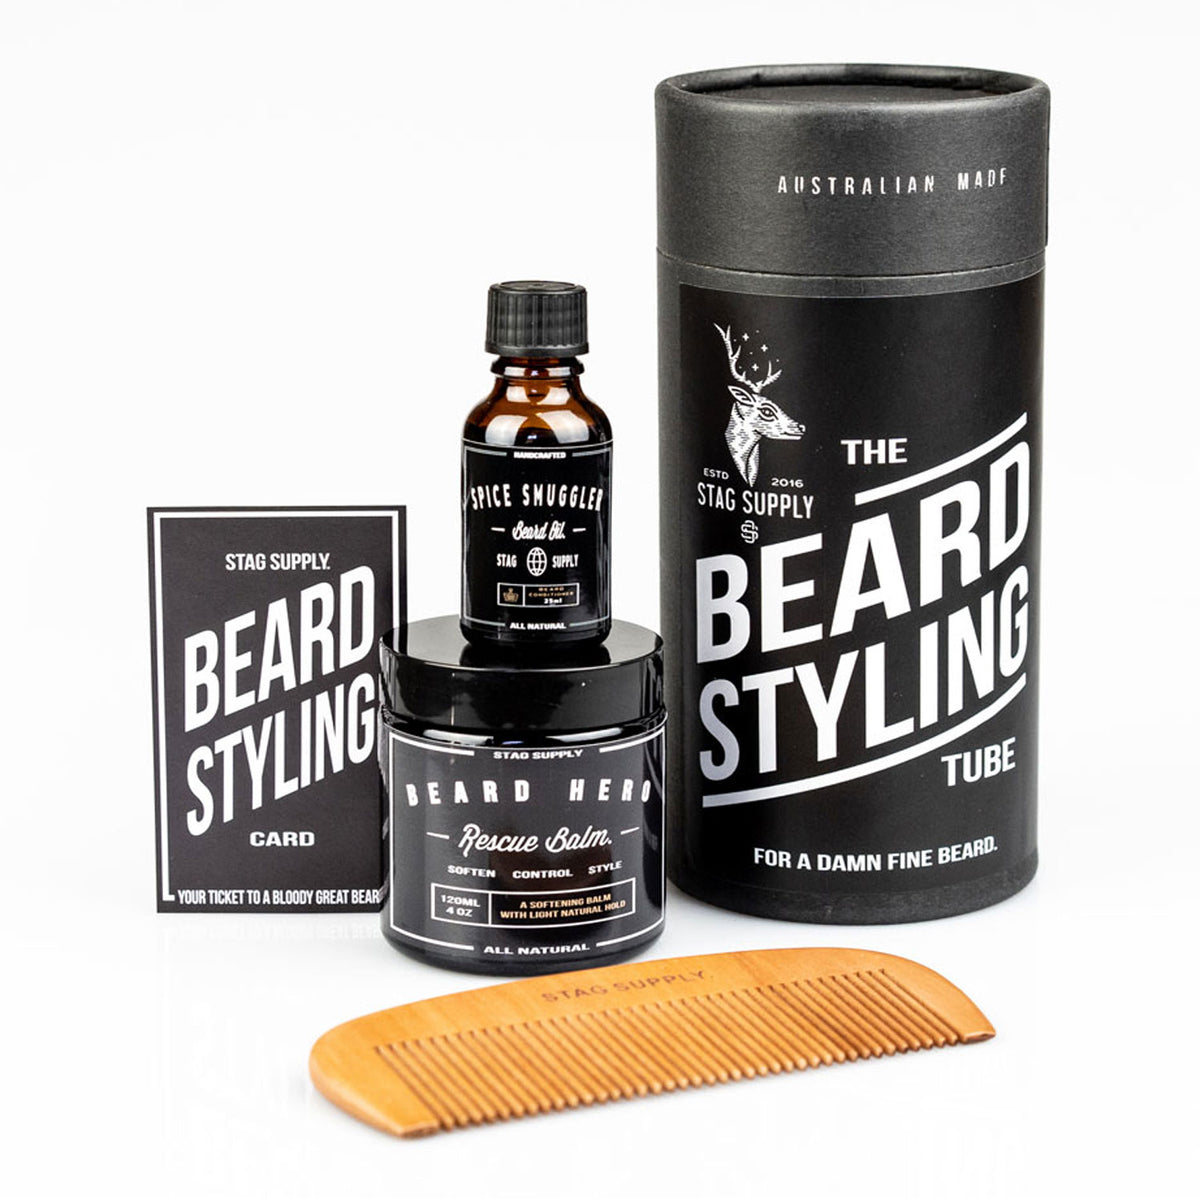 Stag Supply Beard Styling Tube Gift Pack - Orcadia